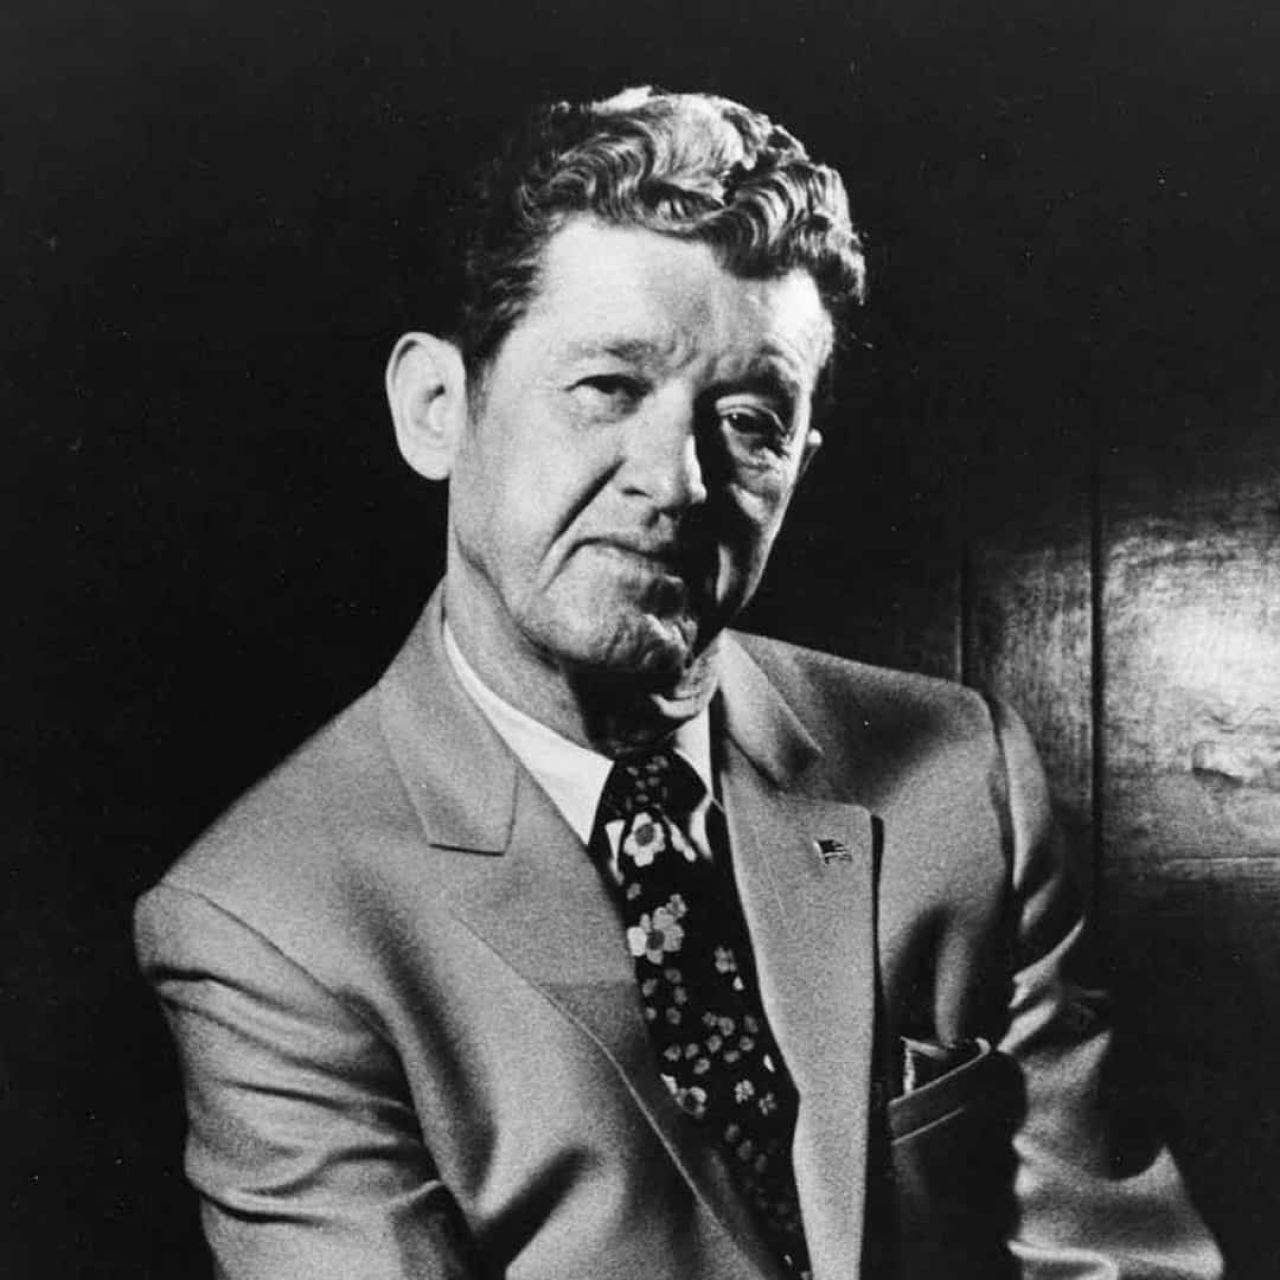 Roy Acuff Country Music Fiddle Player&Singer Wallpaper